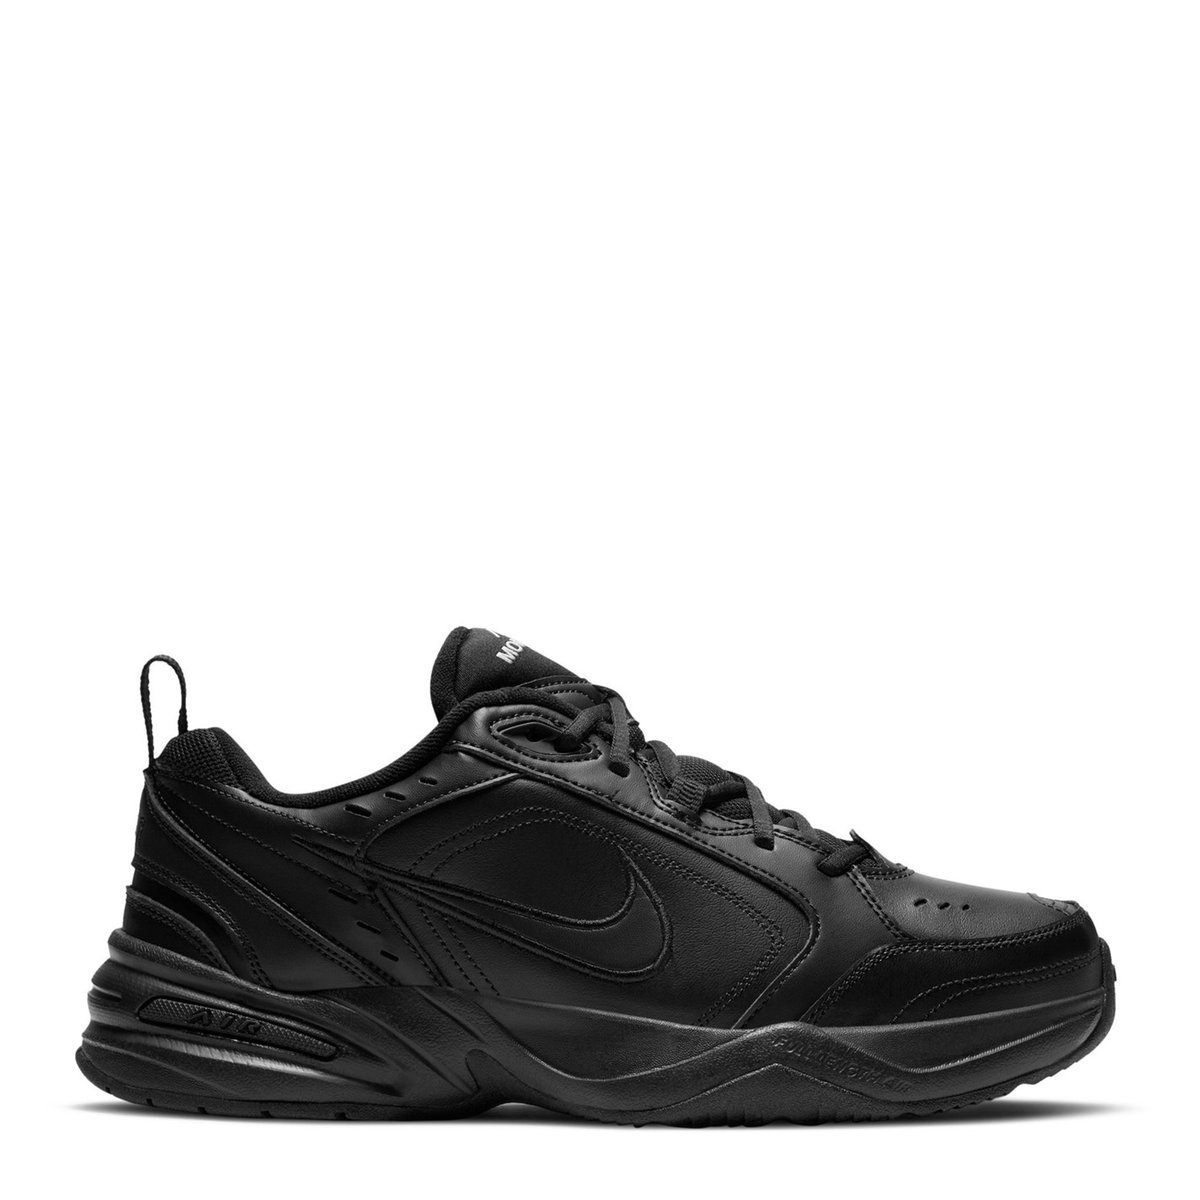 Size 12 Nike Nike Air Monarch IV Training Shoes Mens trainers